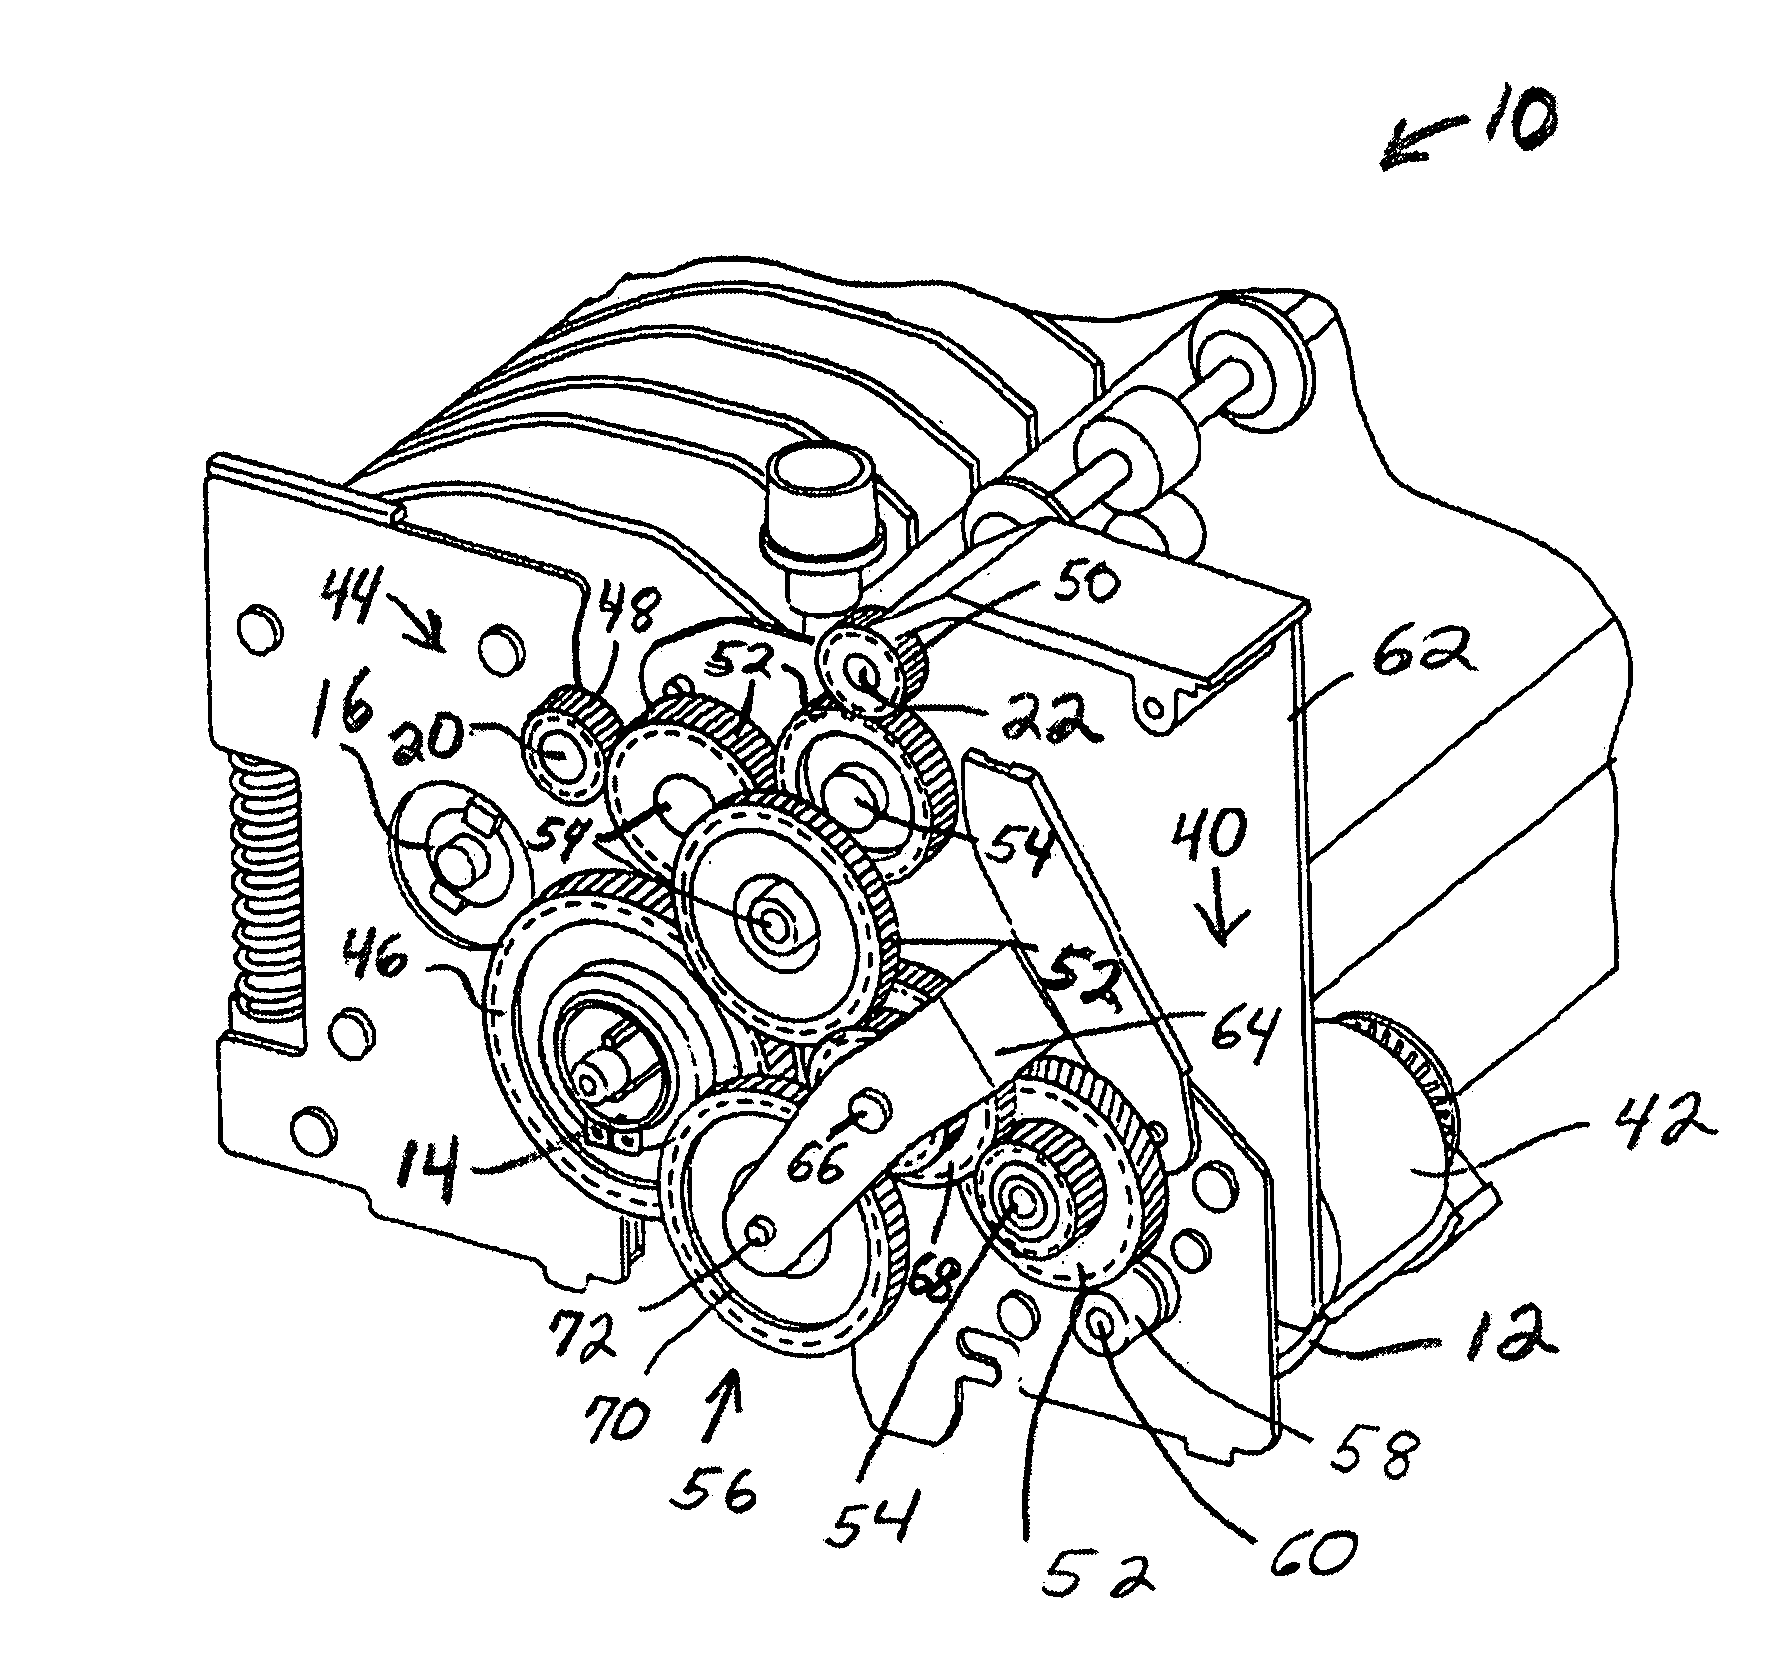 Integrated fuser unit and drive system for use in an electrophotographic imaging process